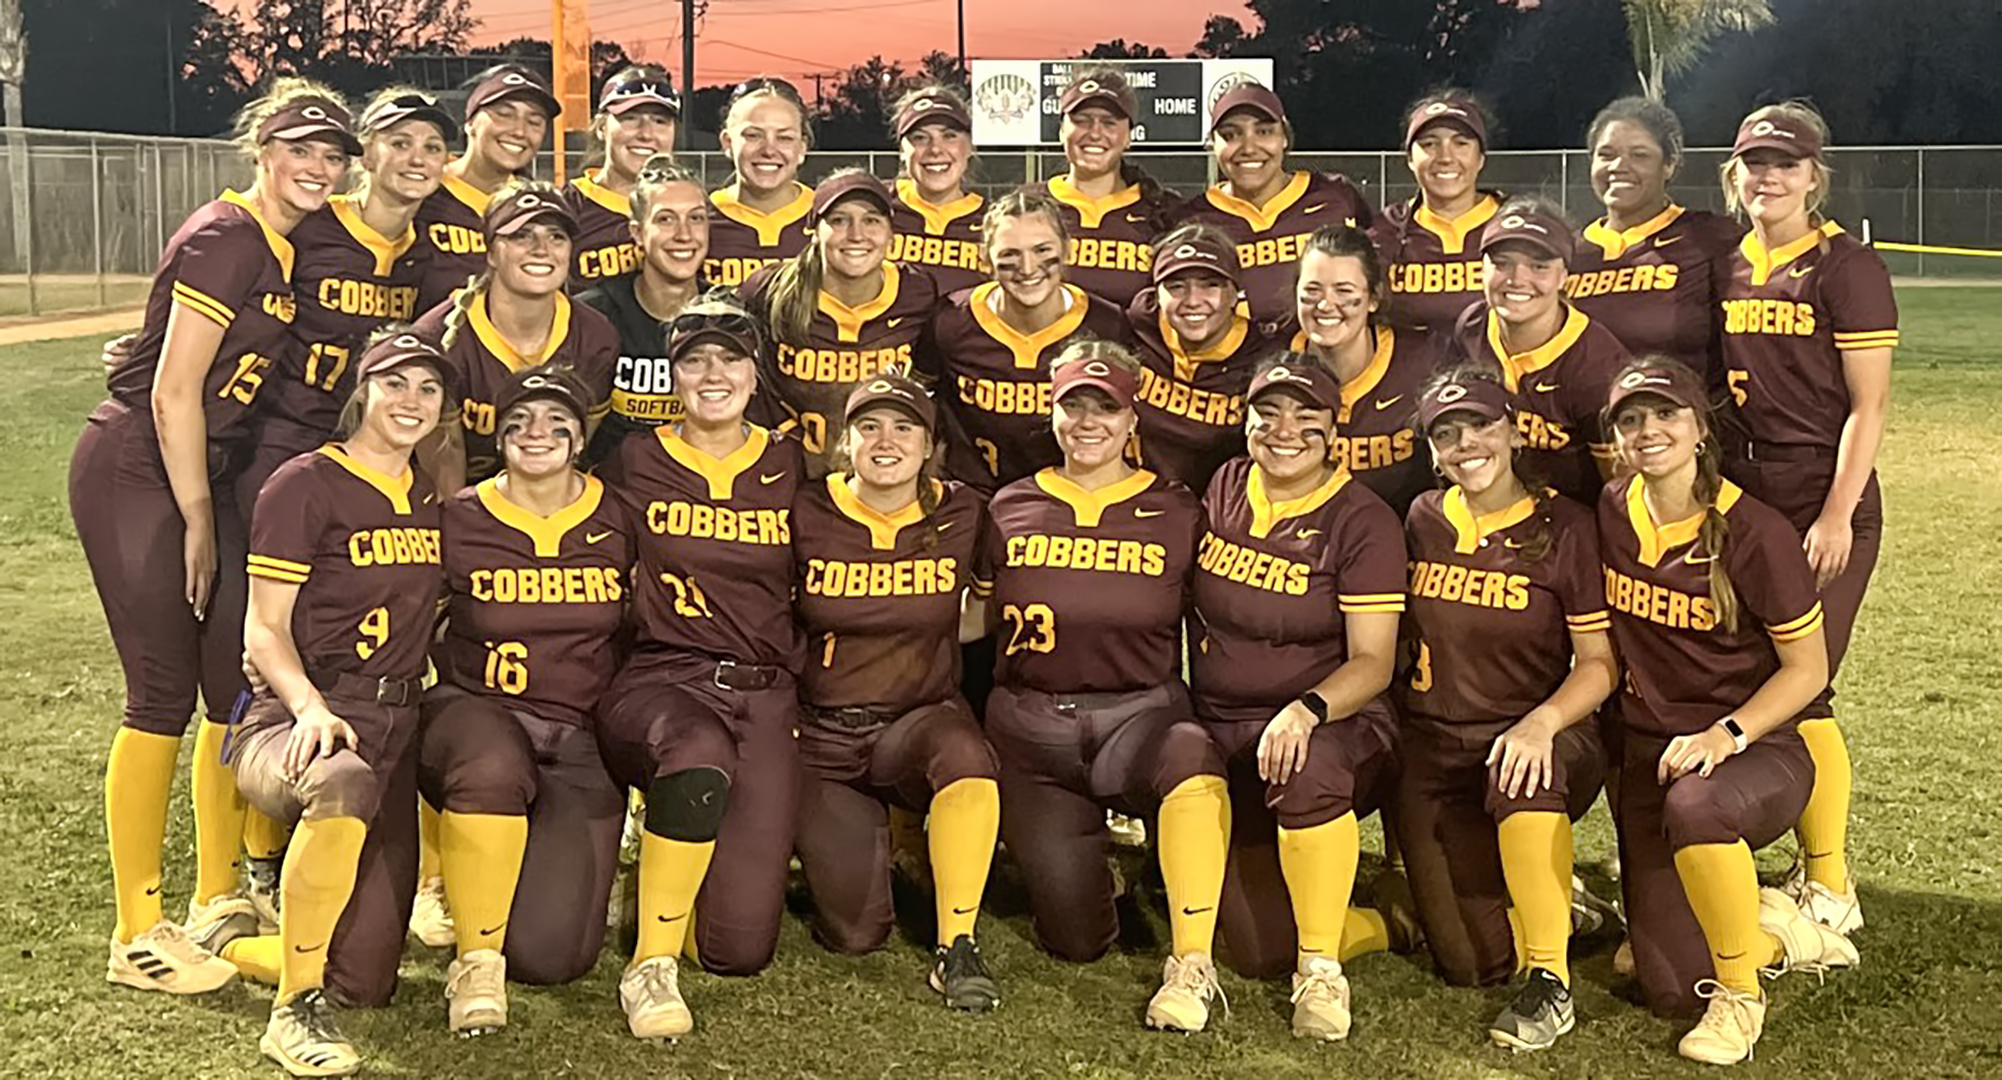 Concordia finished off its trip to Florida by winning two of its final three games. The Cobbers beat Mount Mary 12-3 in 5 innings on the final day.